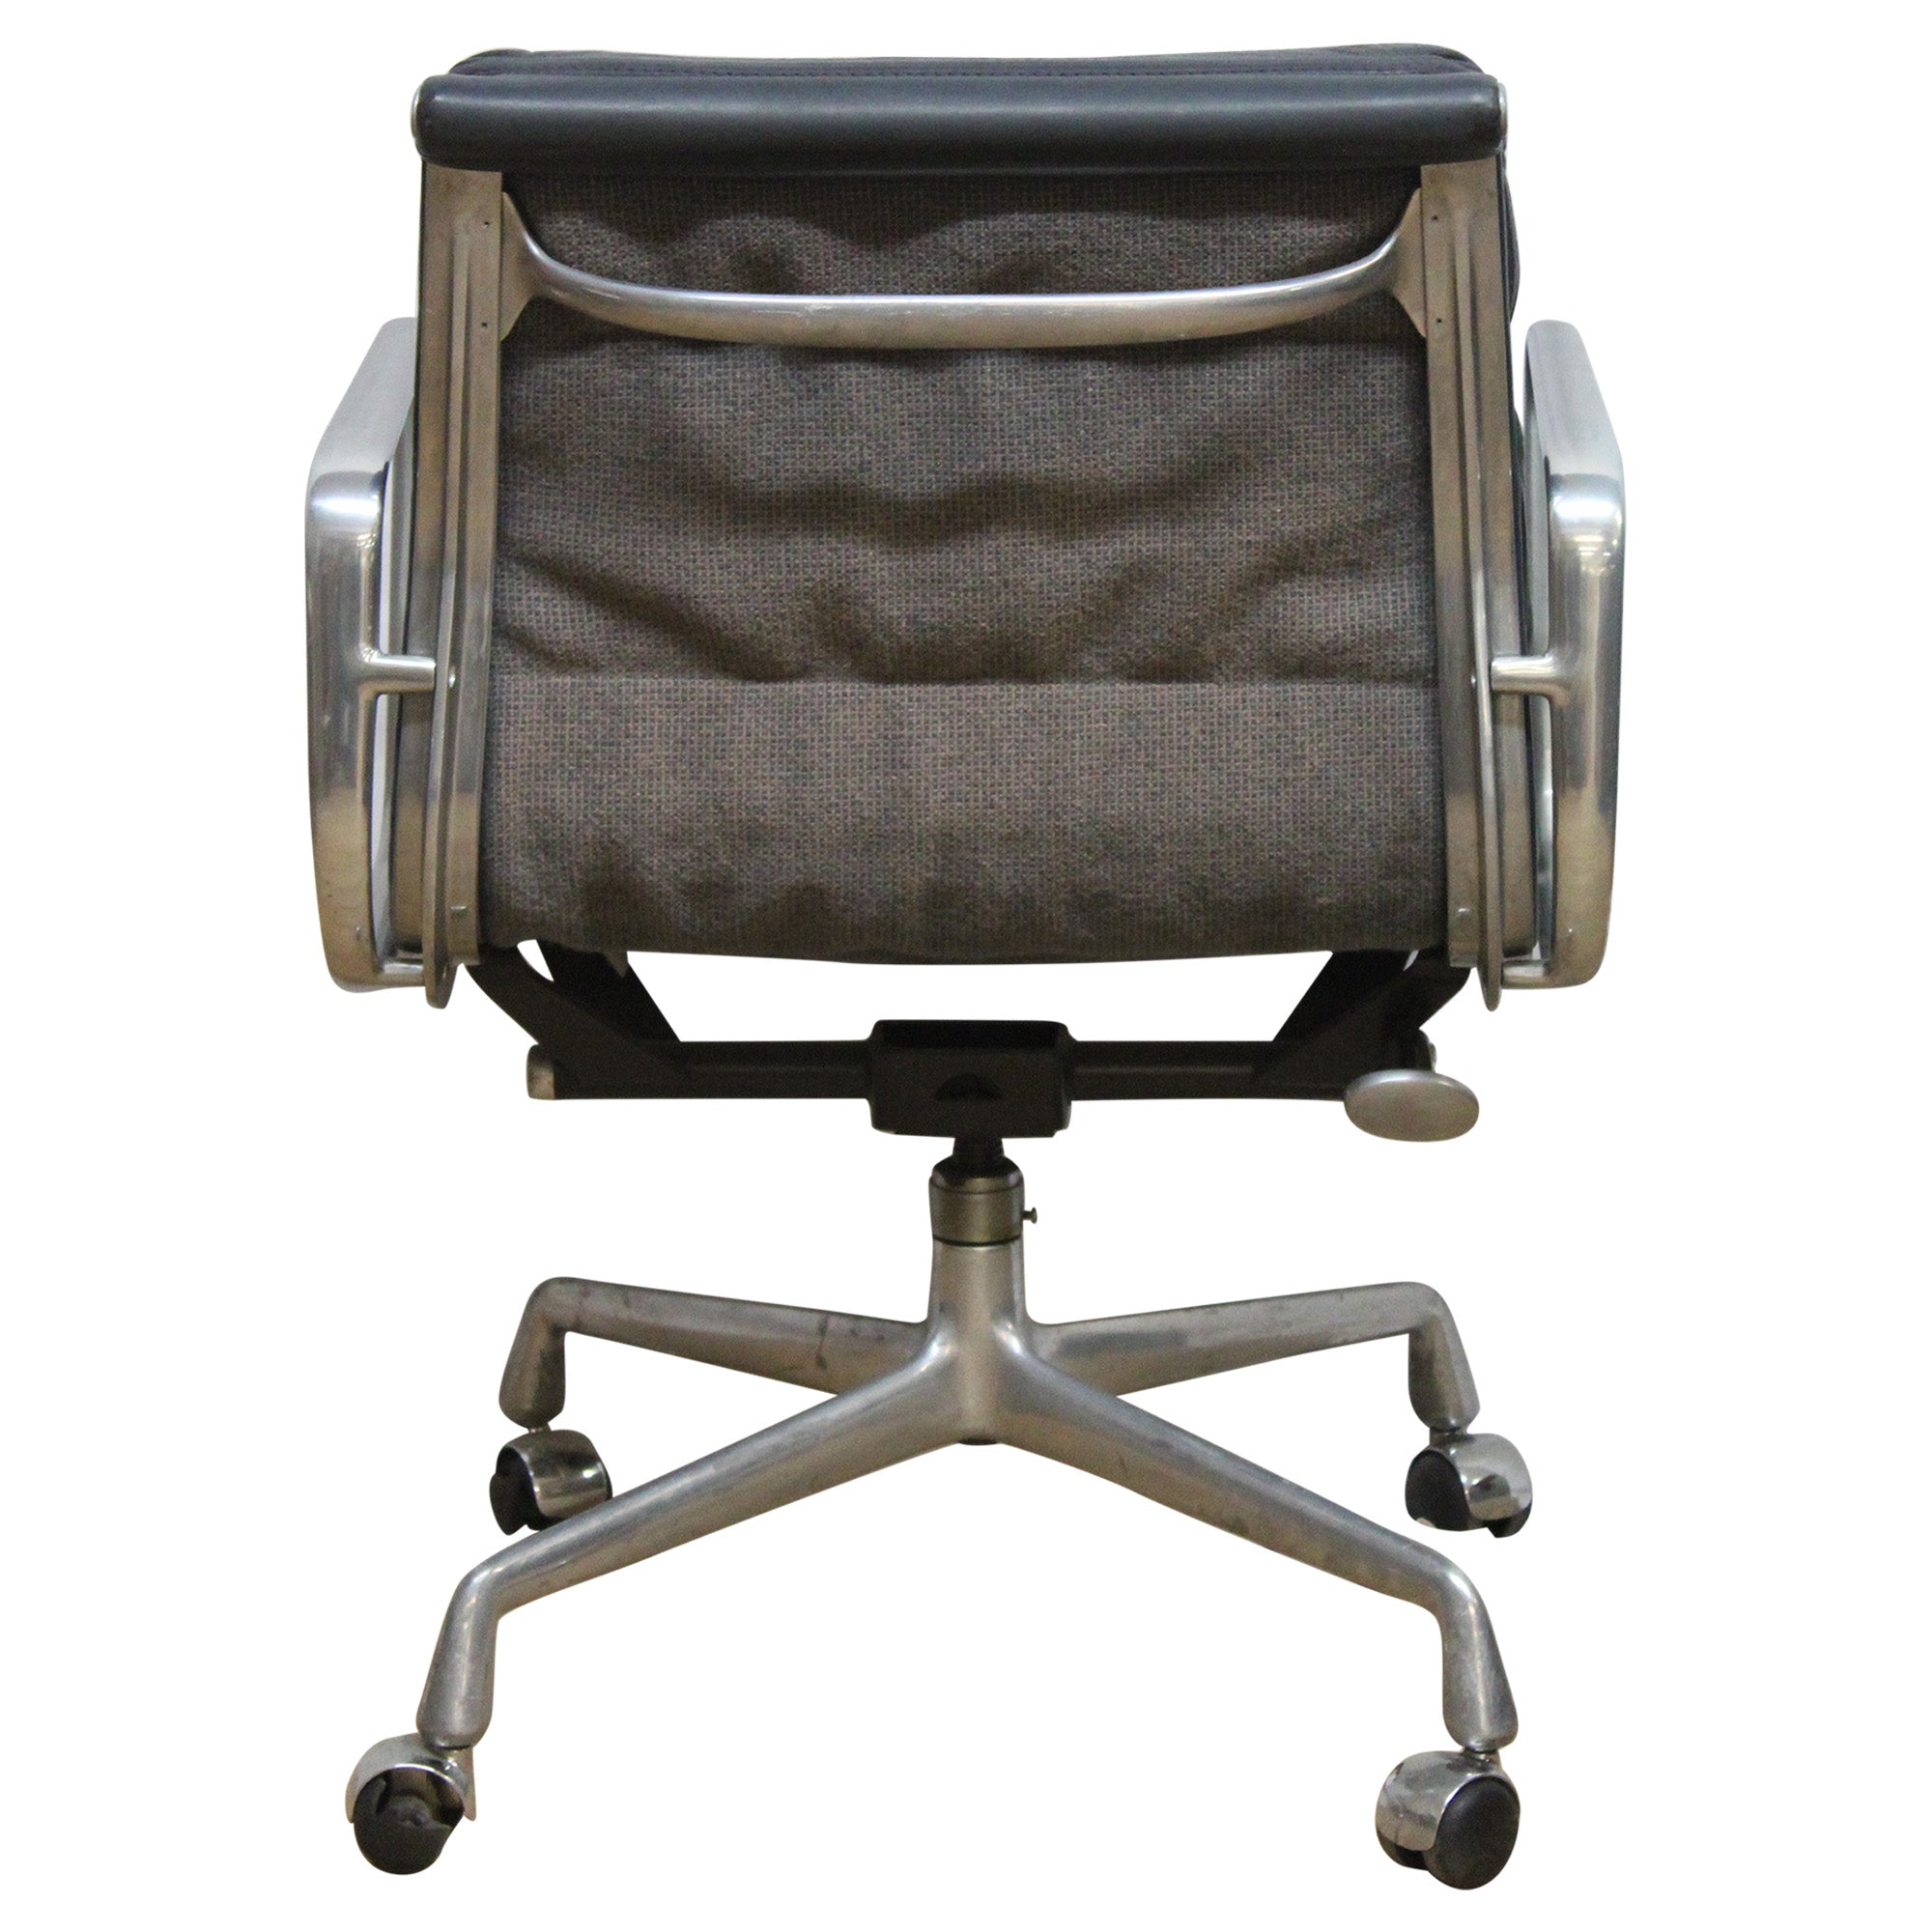 Herman Miller Eames Soft Pad Management Chair, Black - Preowned